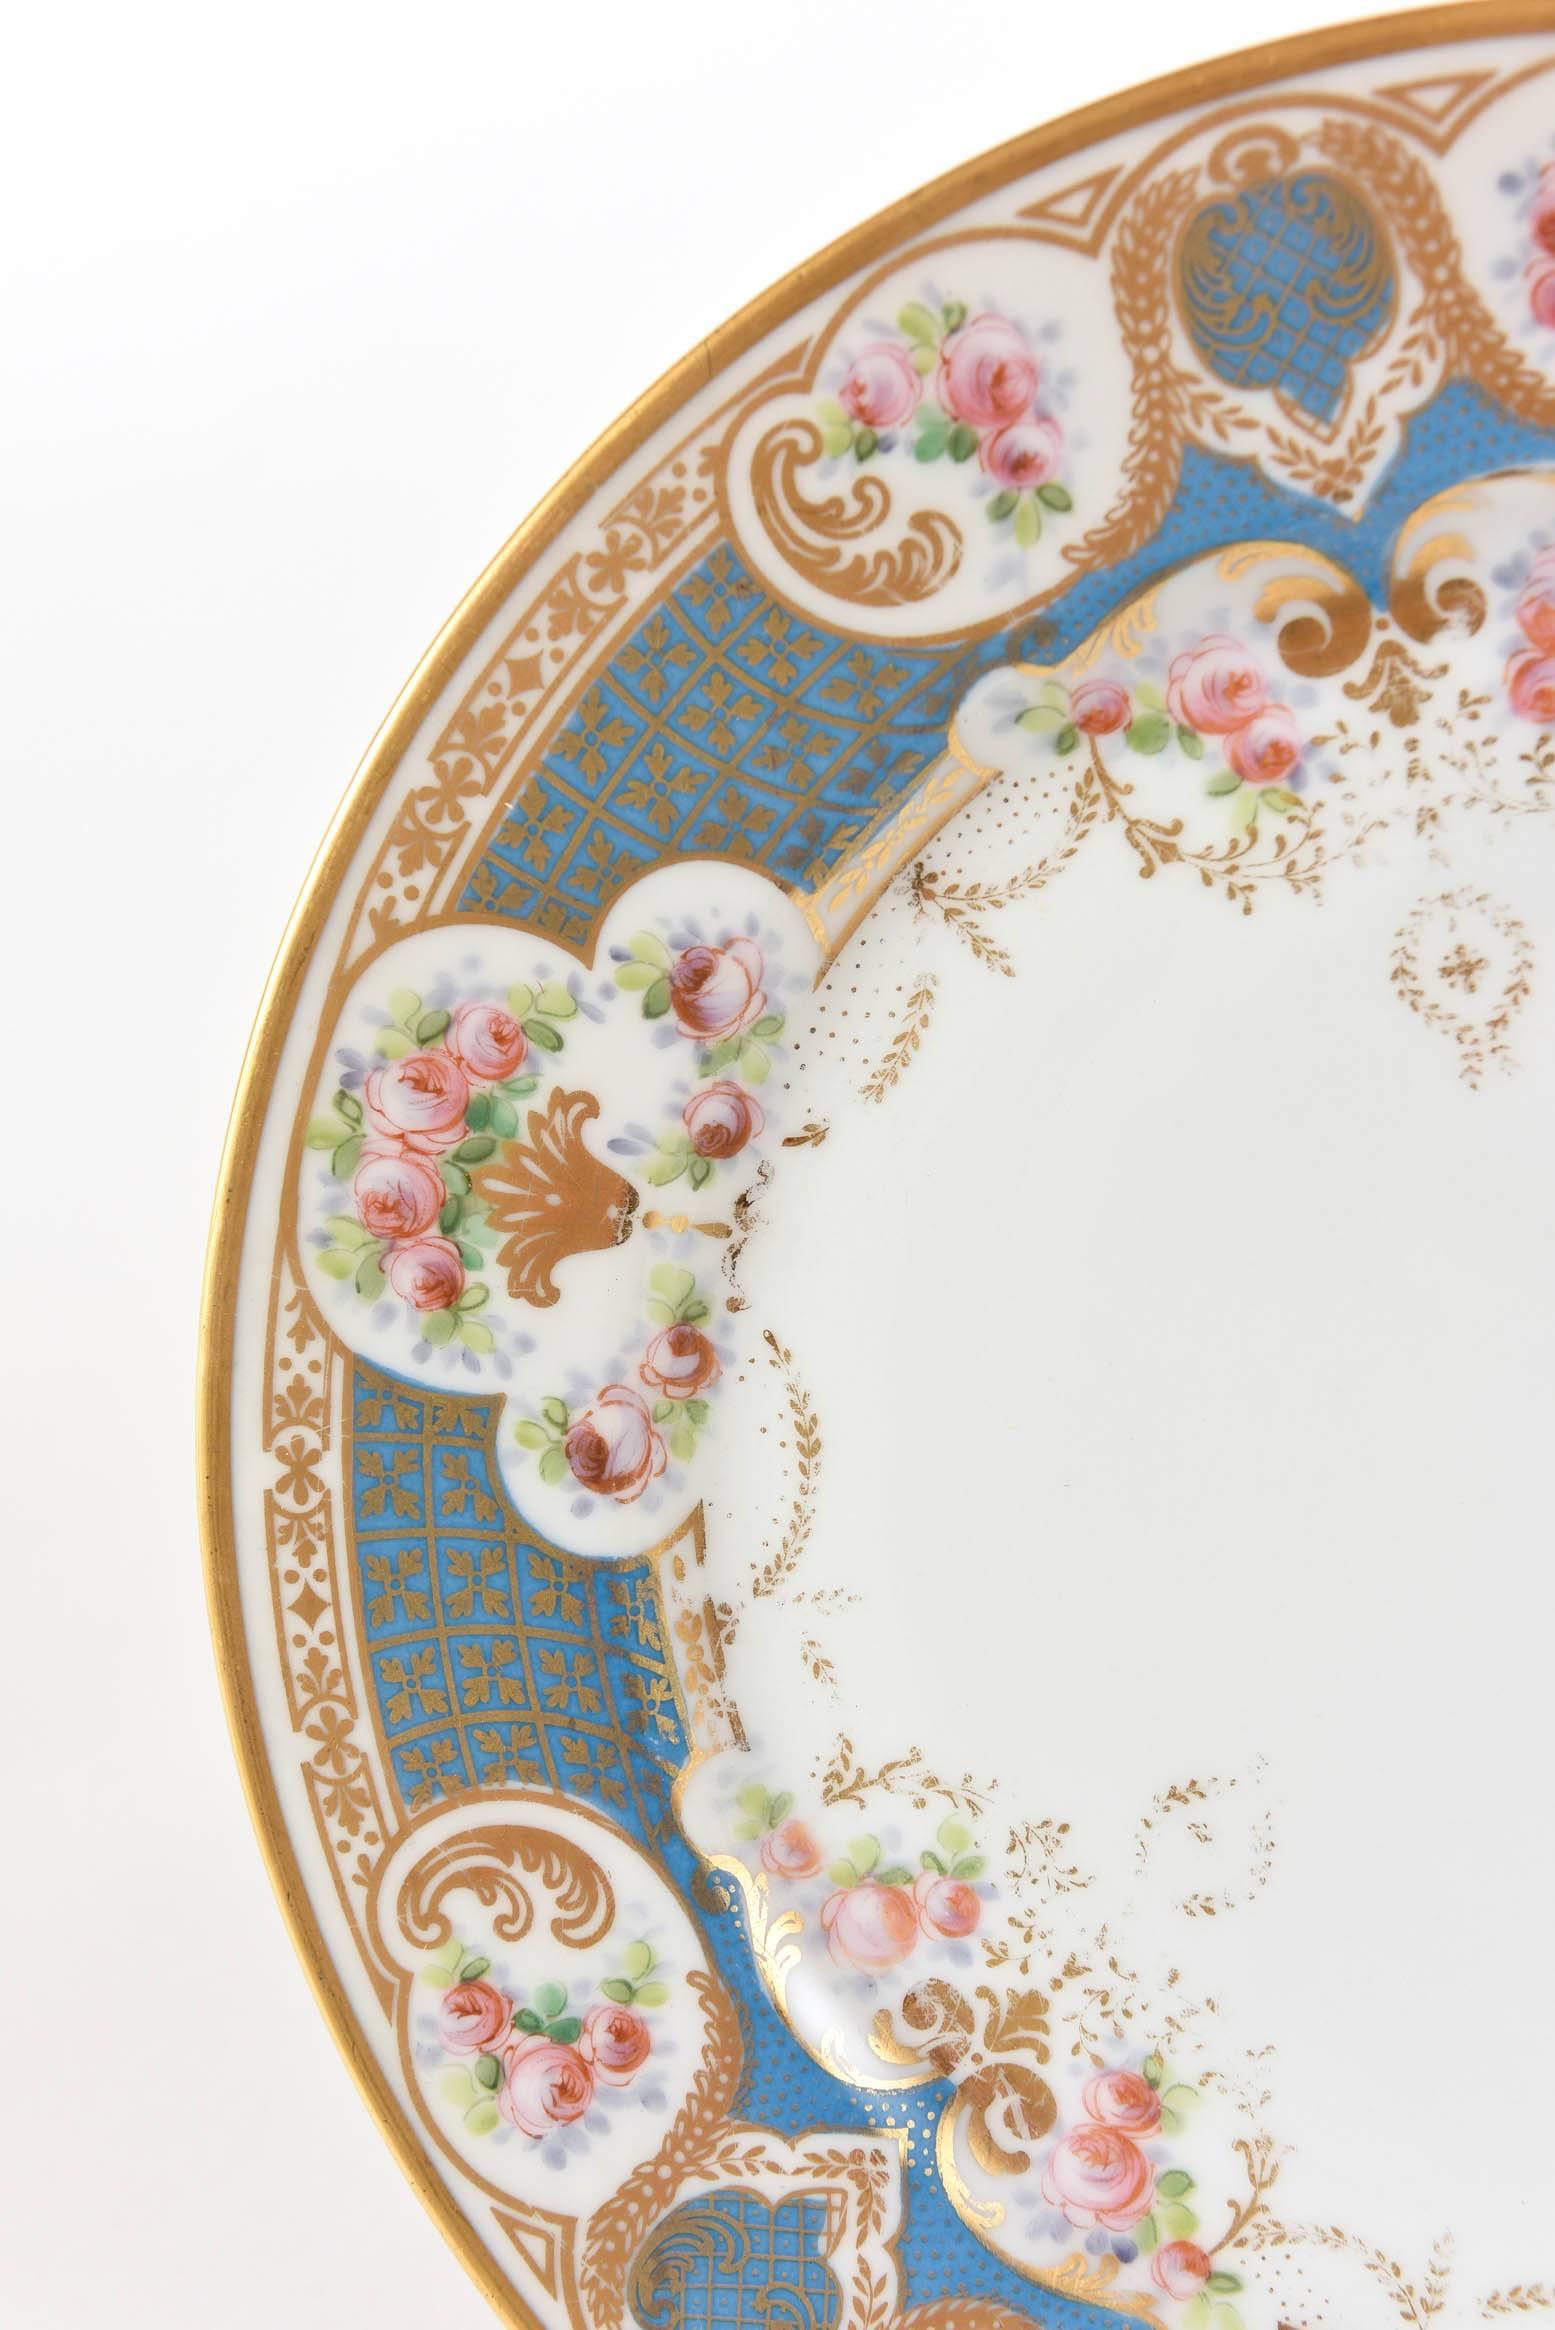 Just in time for Holiday entertaining or pretty cabinet display a set of five dinner plates to mix and match in. These feature gorgeous cartouches of hand-painted florals on a soft Sevres celeste blue ground. Hallmarked and factory decorated by